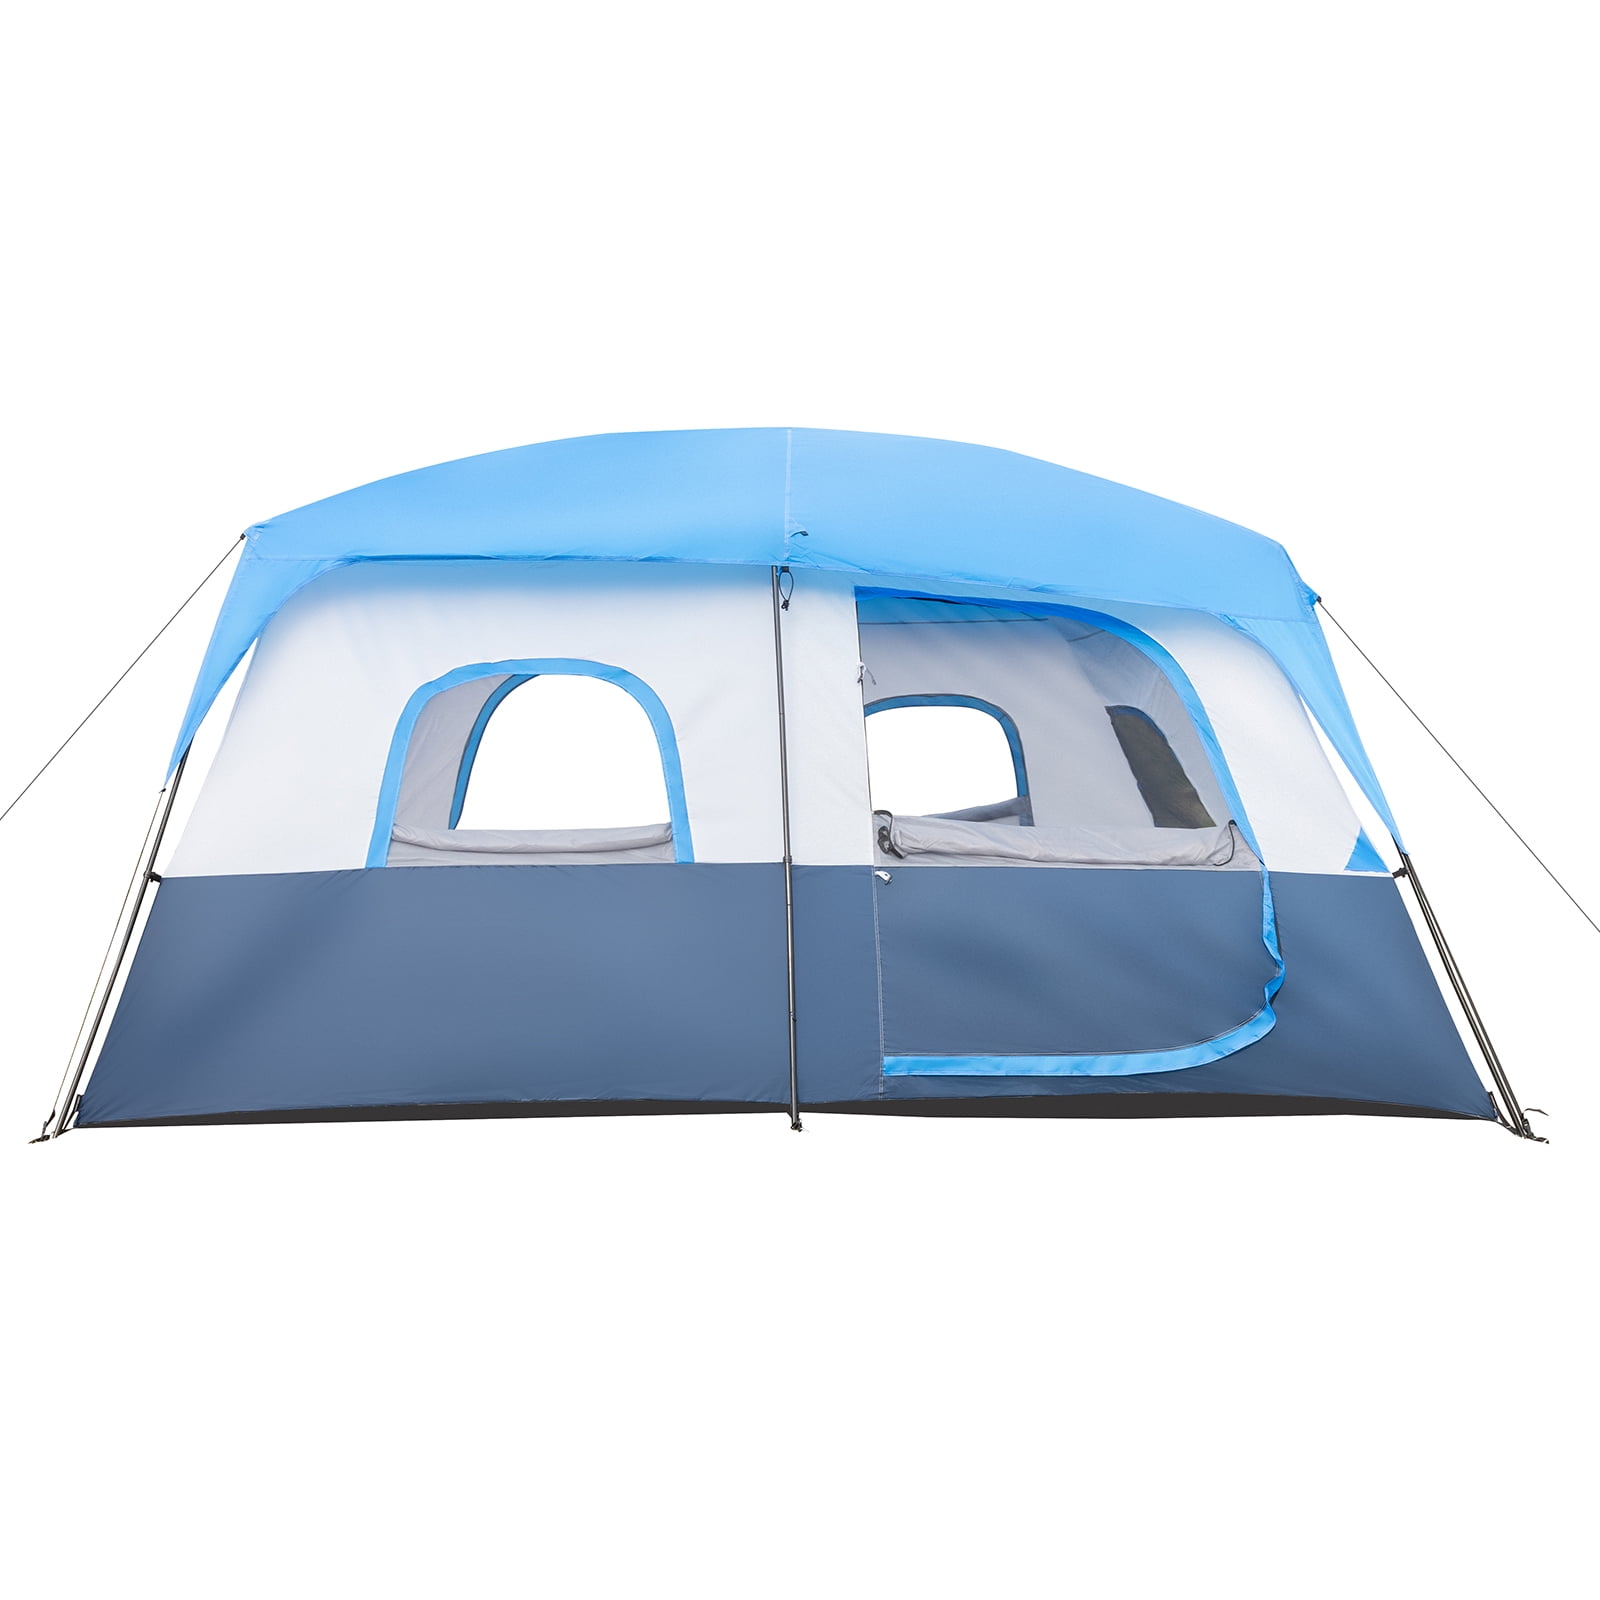 Coleman 10 Person Tent from Costco Review in High Winds at Padre Island  National Seashore 